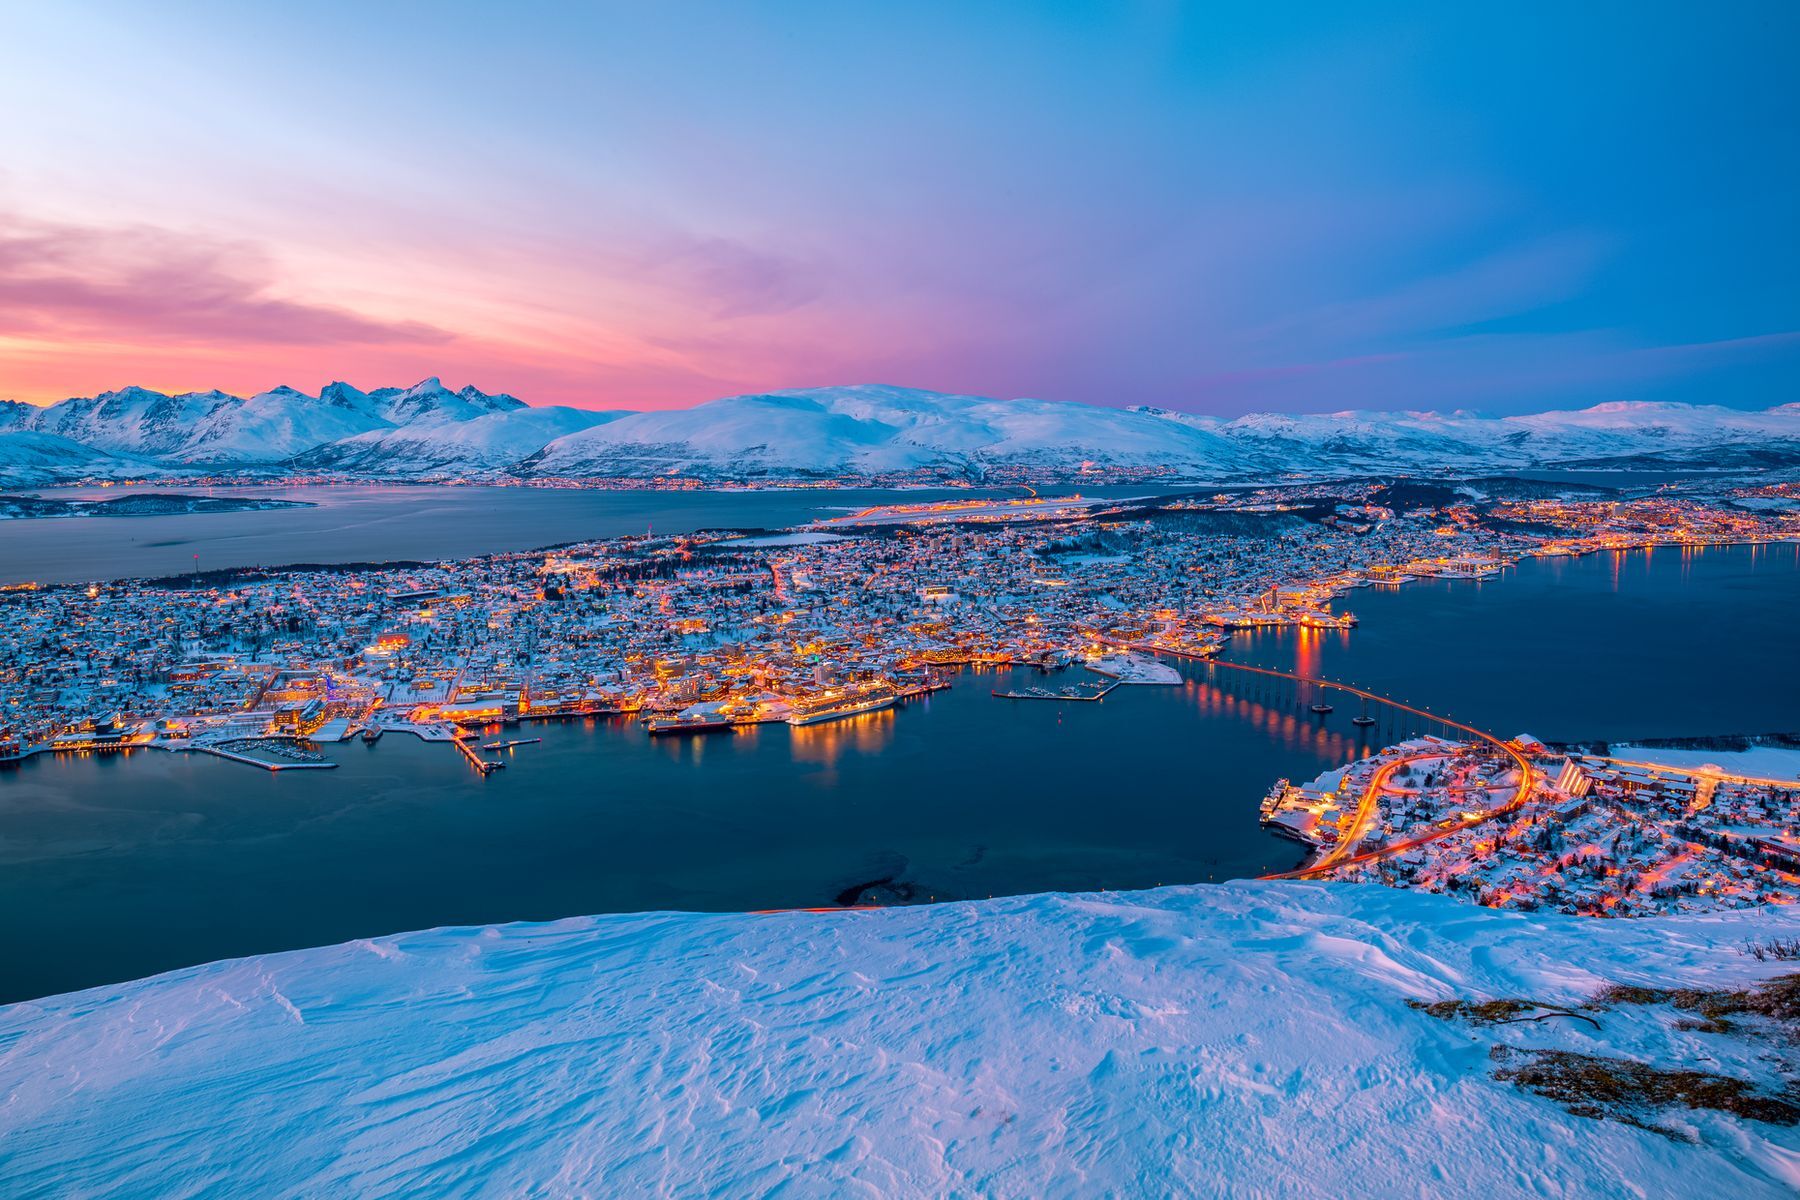 Discover the fascinating Norwegian city of <a href="https://www.visitnorway.com/places-to-go/northern-norway/tromso/?lang=usa" rel="noreferrer noopener">Tromsø,</a> nicknamed “the gateway to the Arctic.” Its maritime charm and polar climate make it the ideal destination for dog sledding, whale watching, admiring the northern lights, and other winter activities. Don’t forget to visit the <a href="https://visitnordic.com/en/attraction/polaria-museum" rel="noreferrer noopener">Polaria Museum</a> to learn more about Nordic life near the Arctic Circle and be sure to stop by the uniquely designed Arctic Cathedral.